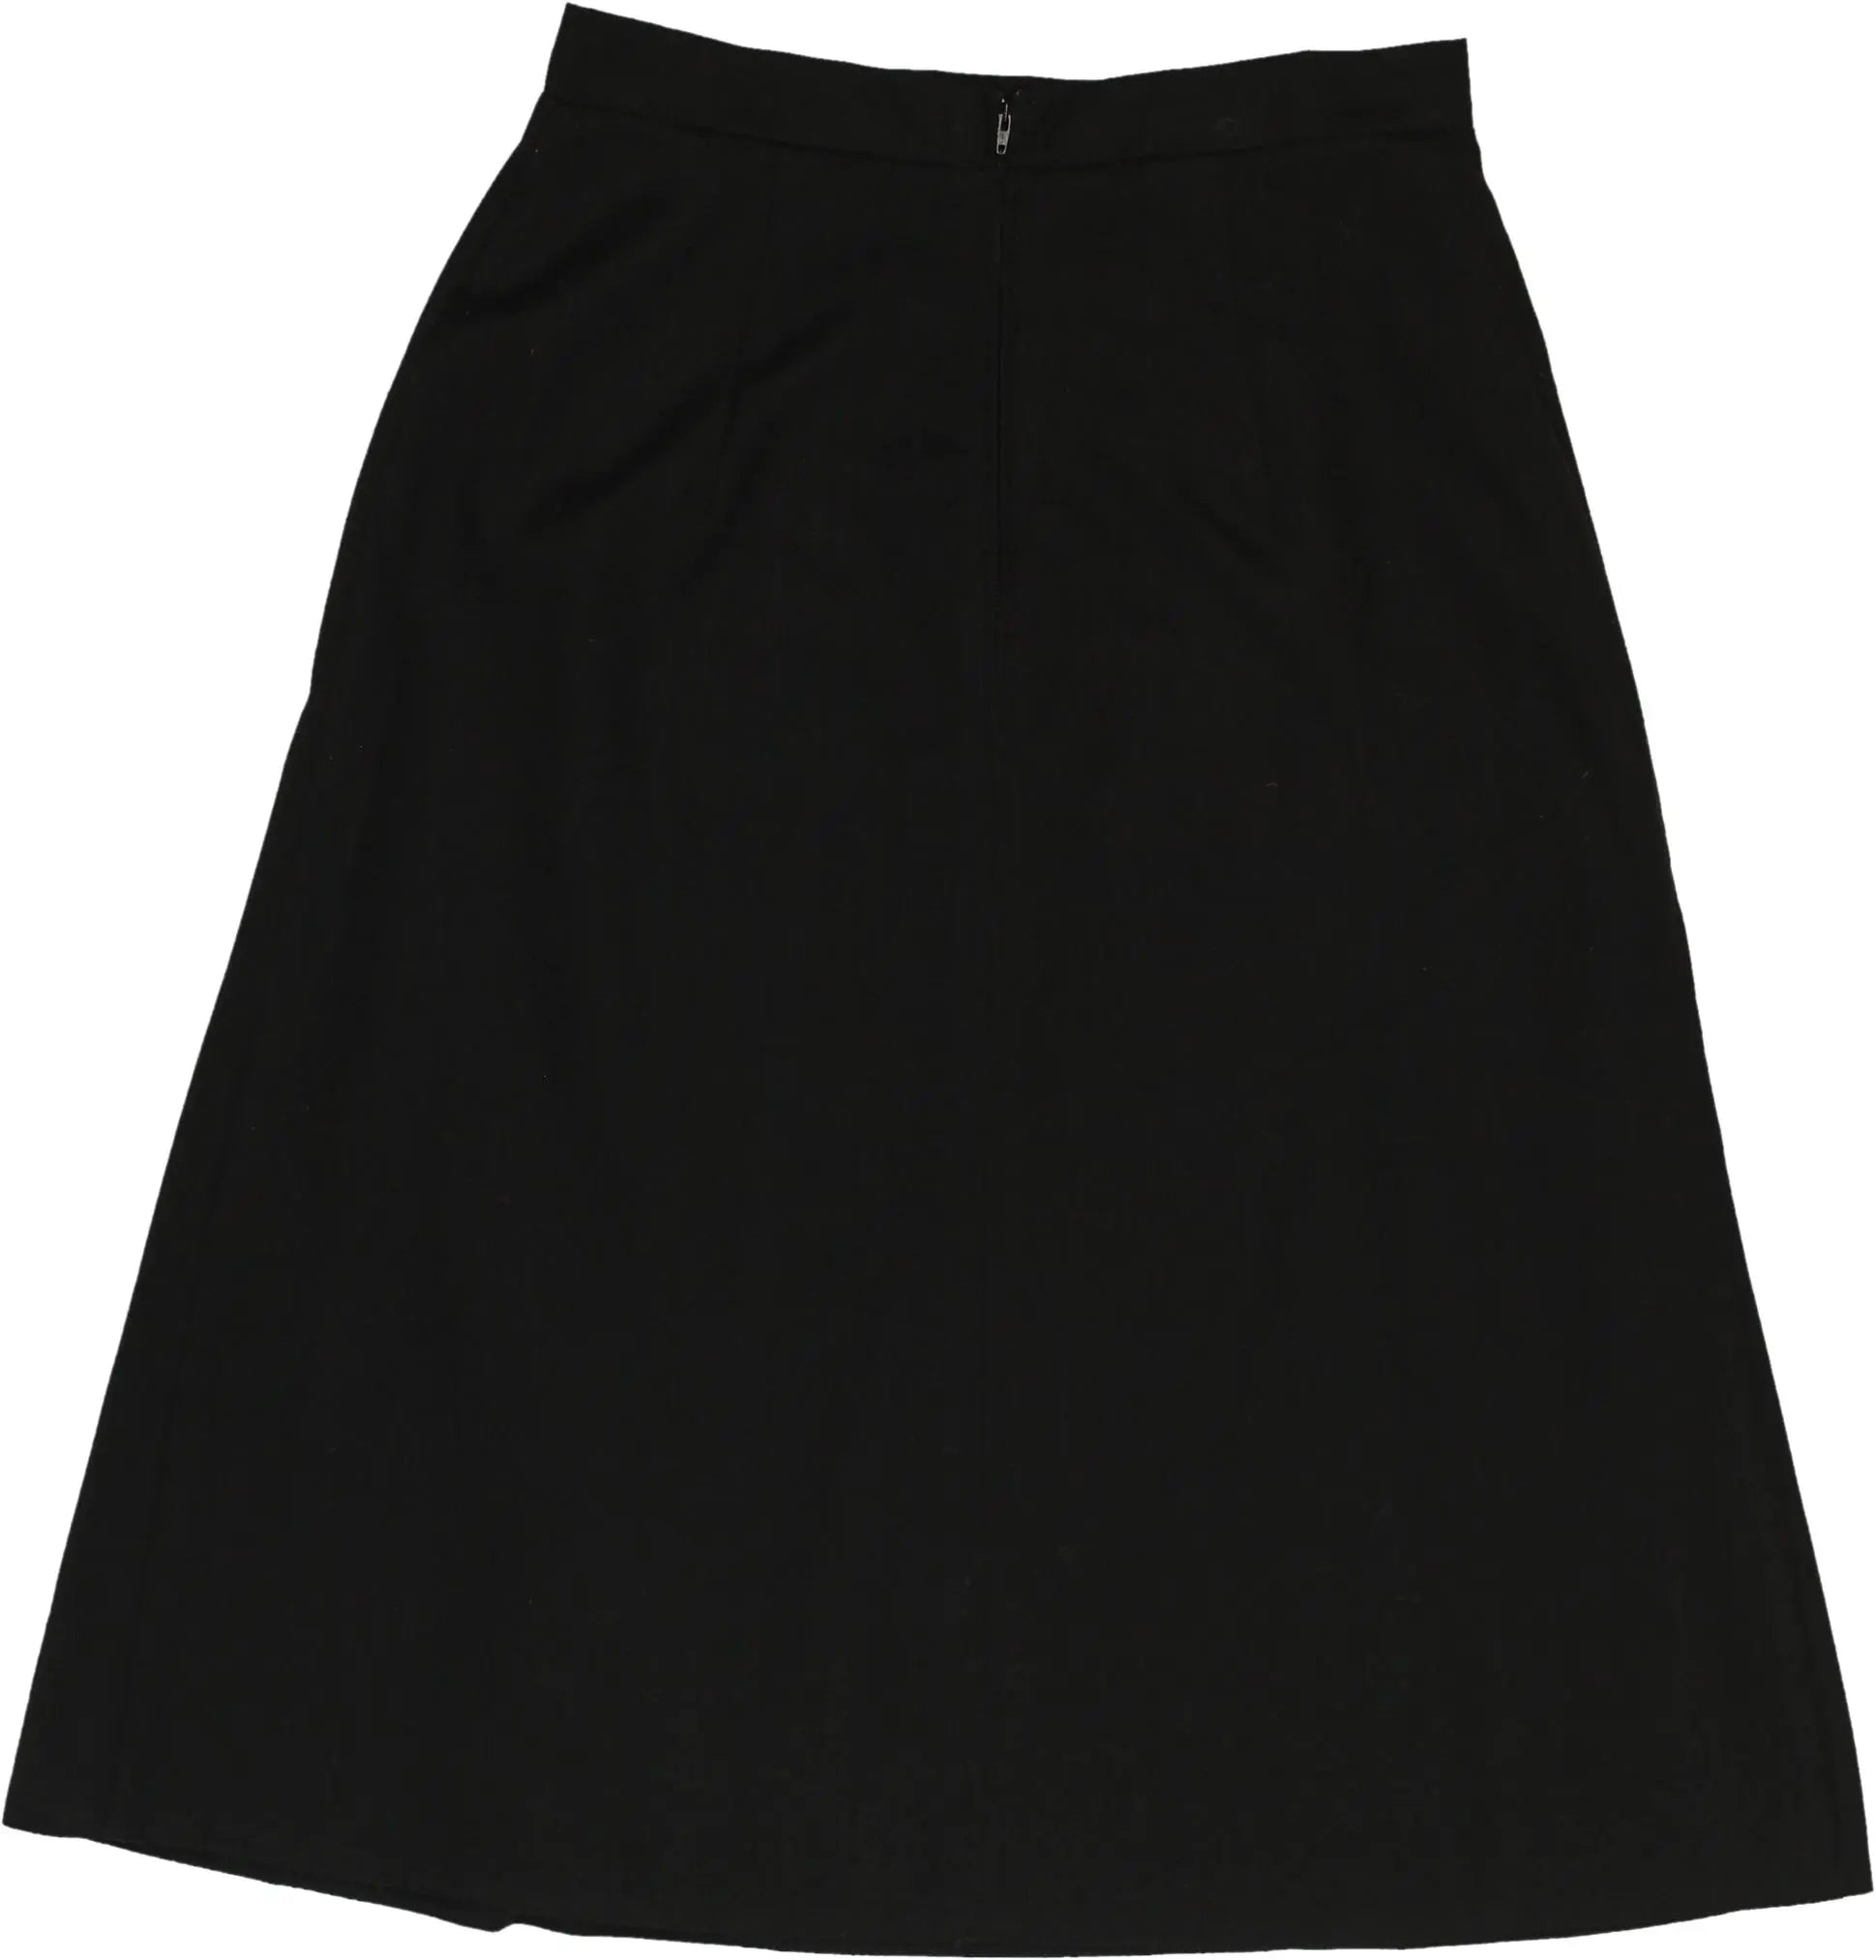 C&A - Black A-line skirt- ThriftTale.com - Vintage and second handclothing